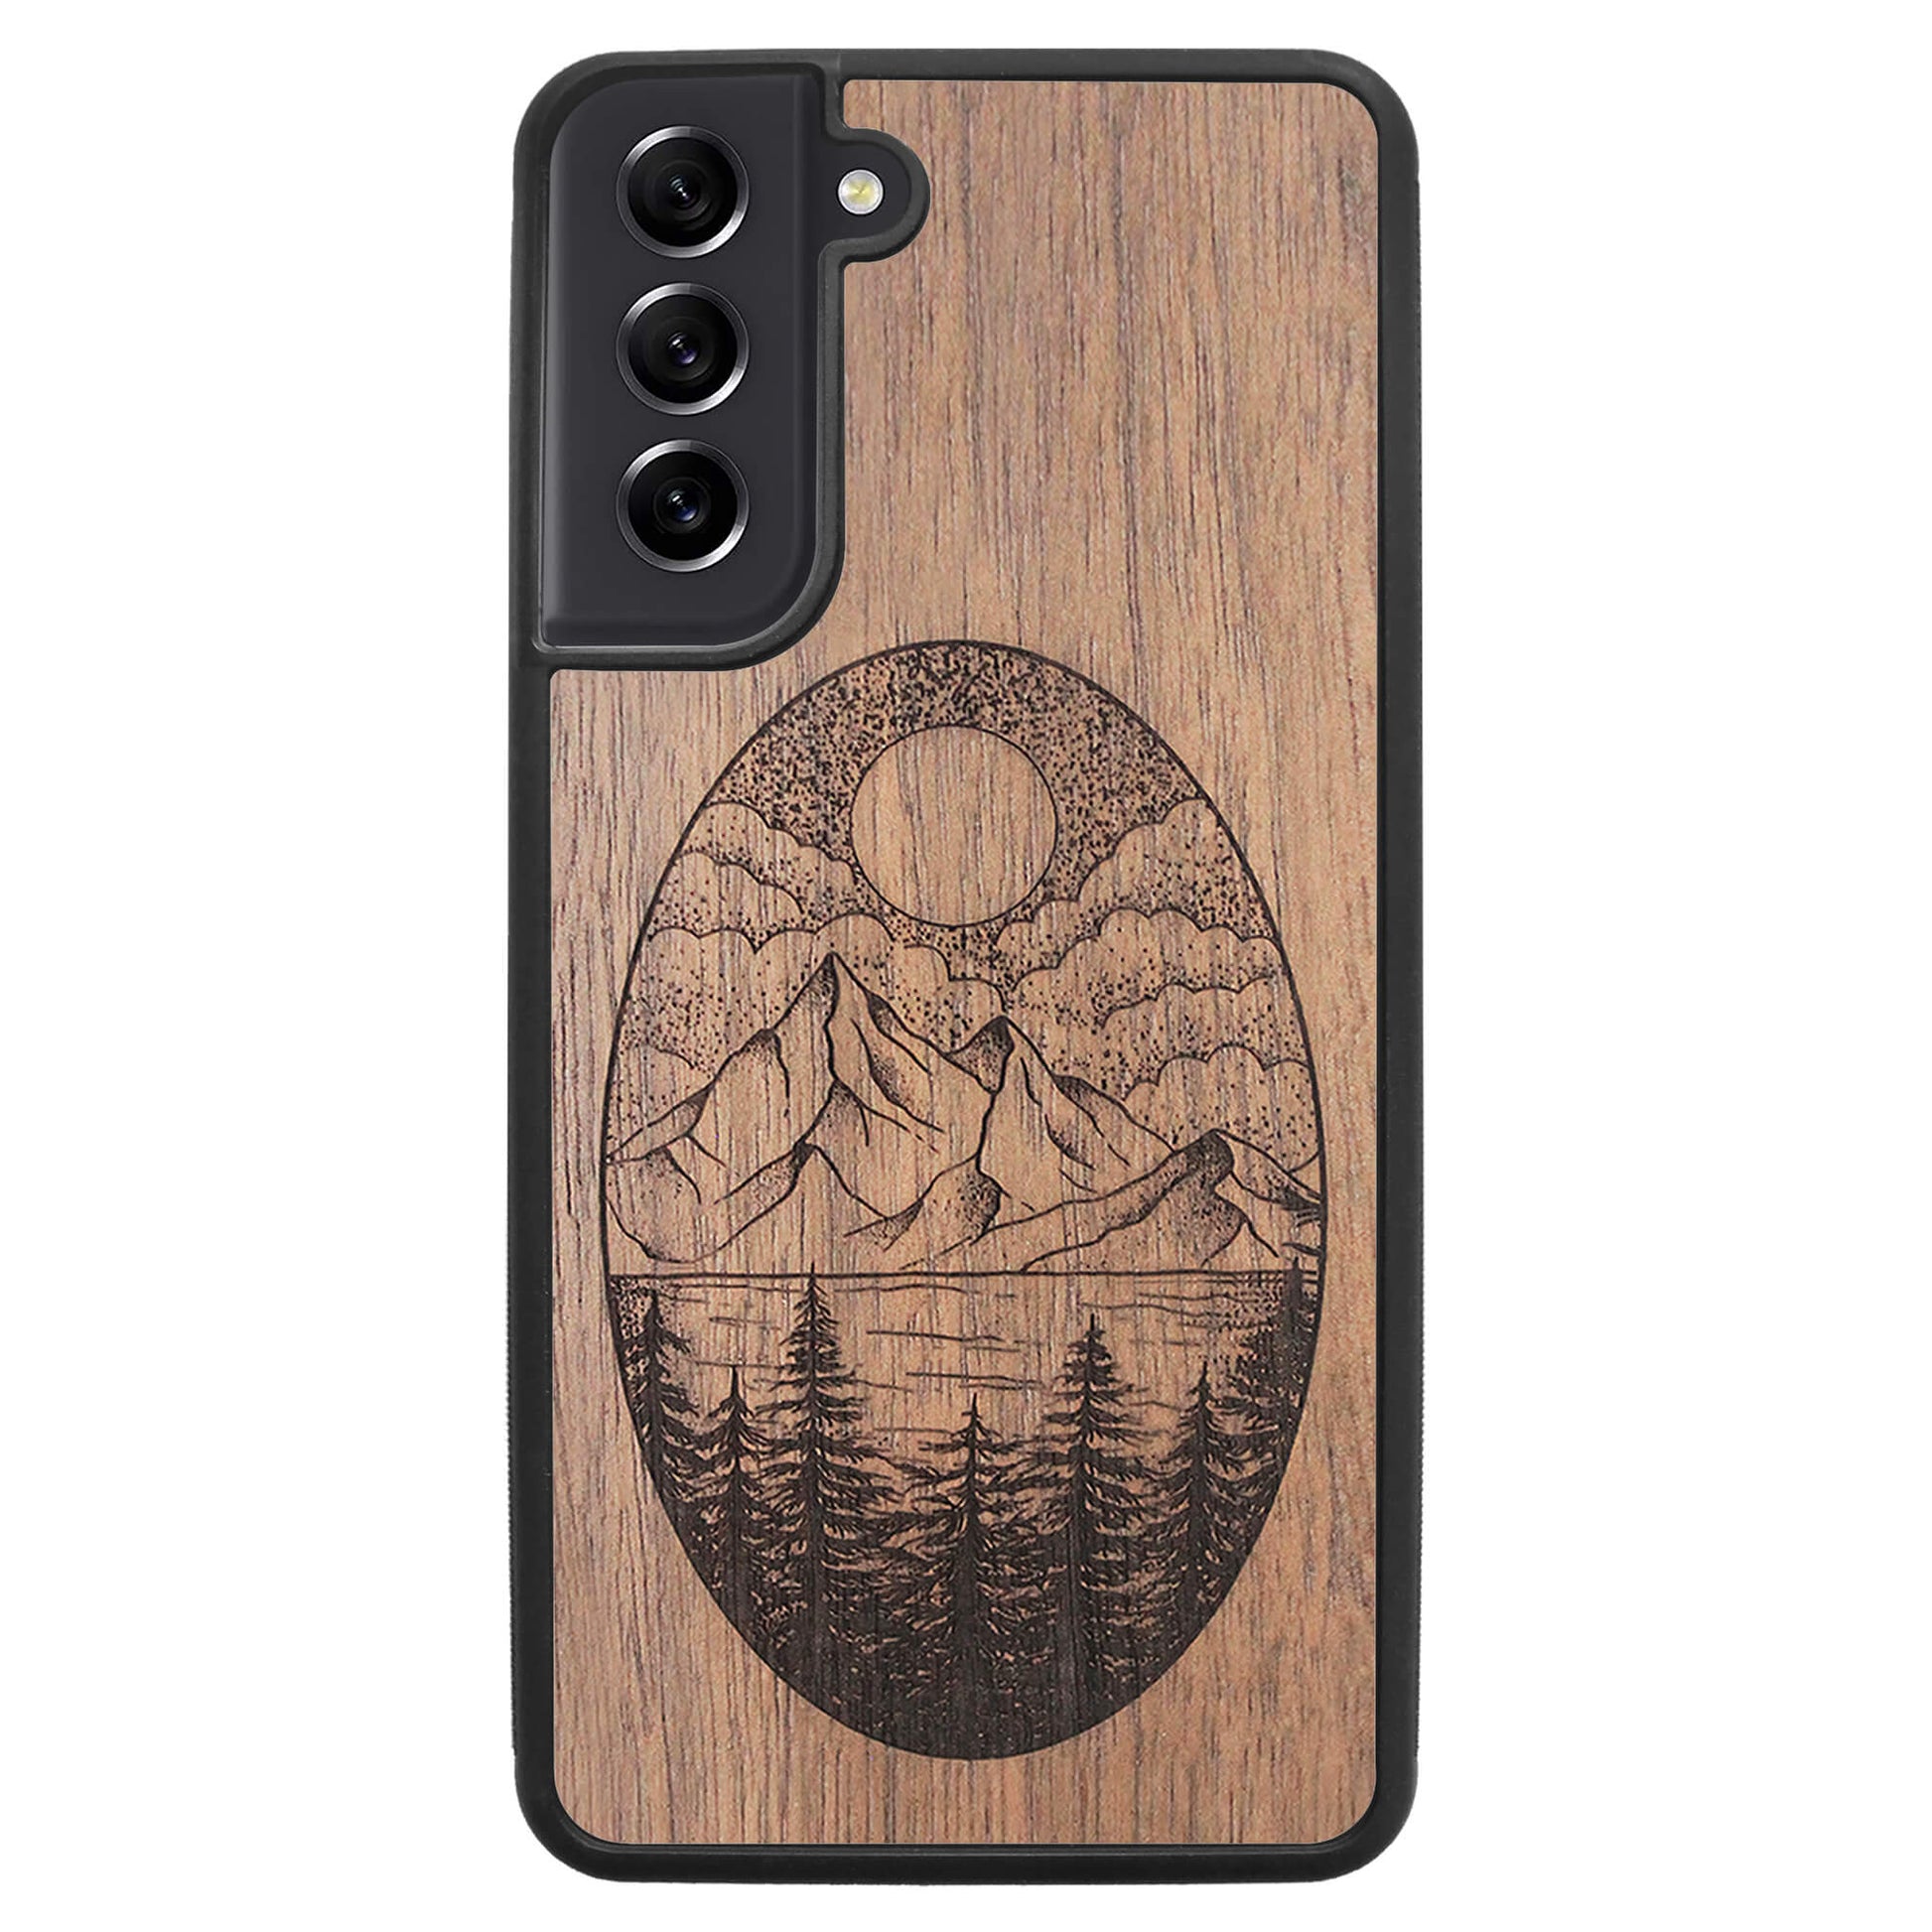 Wooden Case for Samsung Galaxy S21 FE Landscape